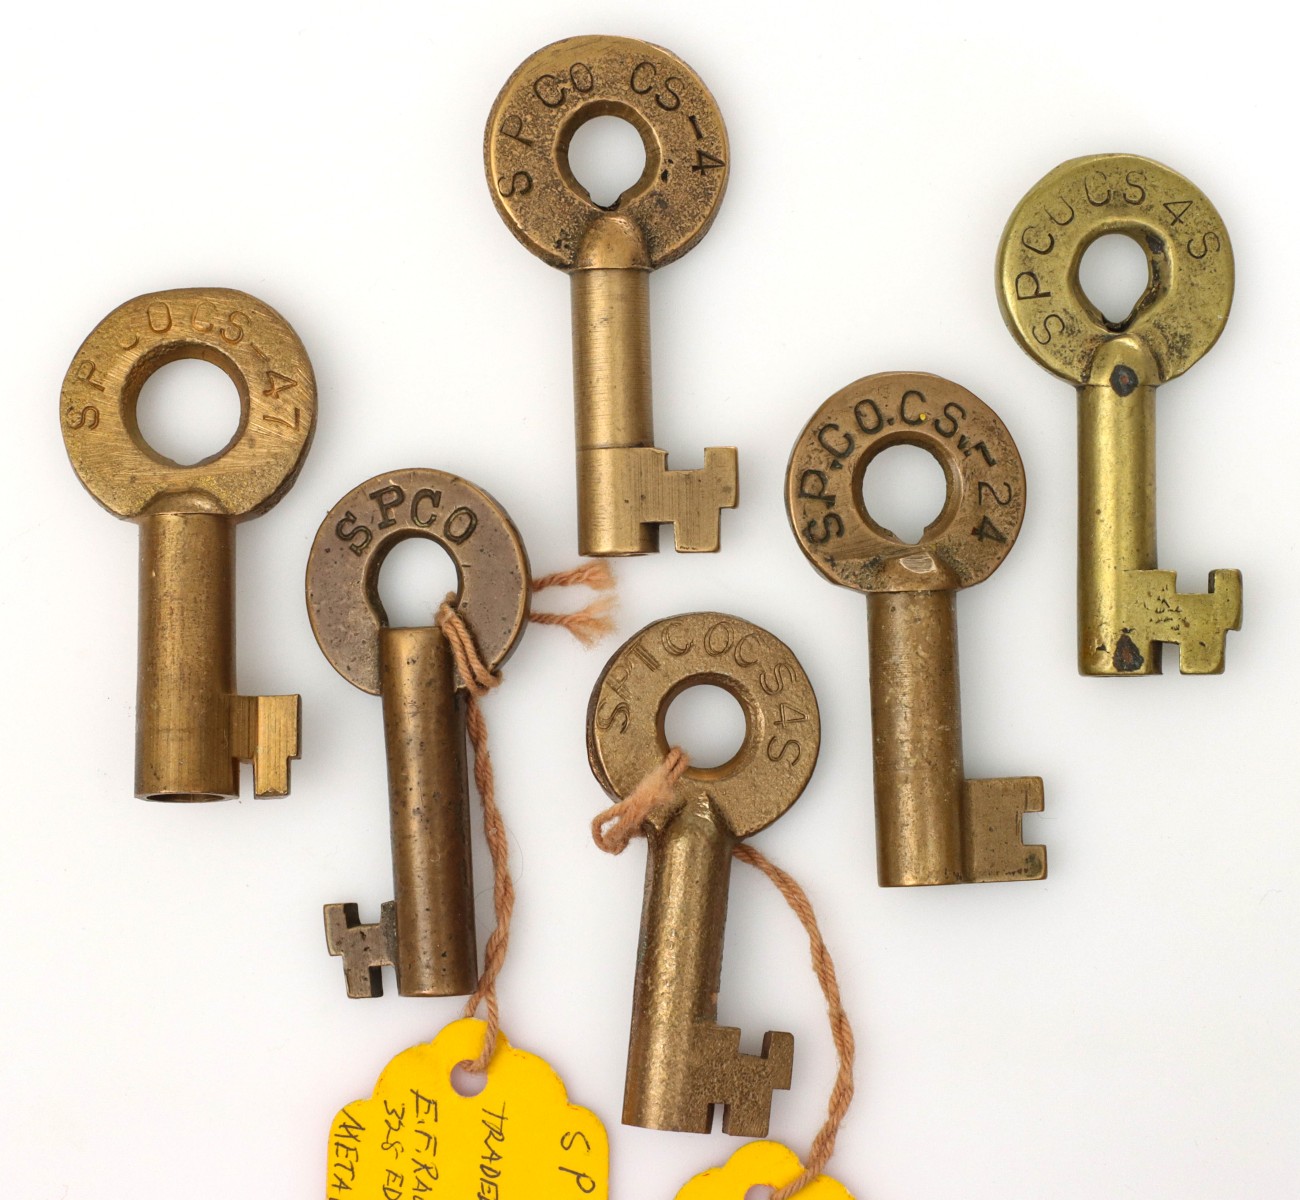 A COLLECTION OF SOUTHERN PACIFIC RAILROAD SWITCH KEYS